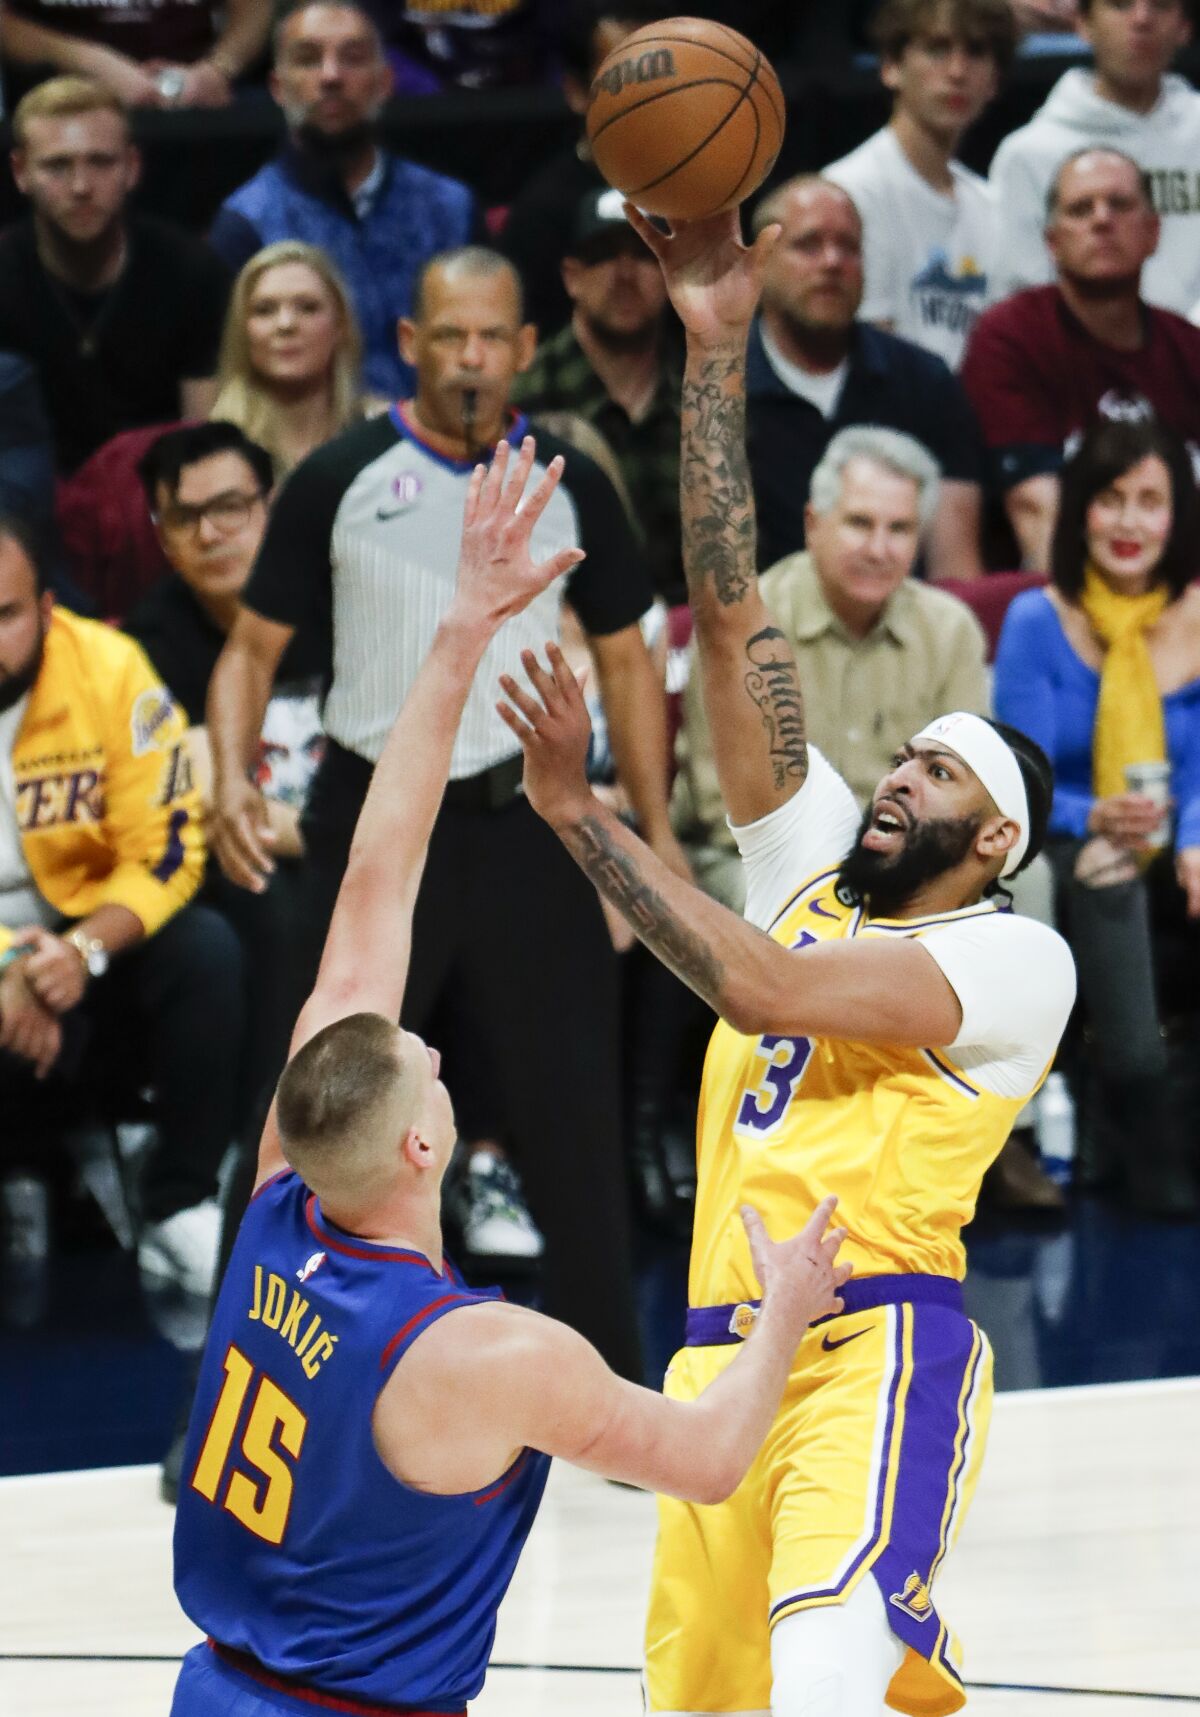 Lakers forward Anthony Davis, right, shoots over Nuggets center Nikola Jokic in the lane.